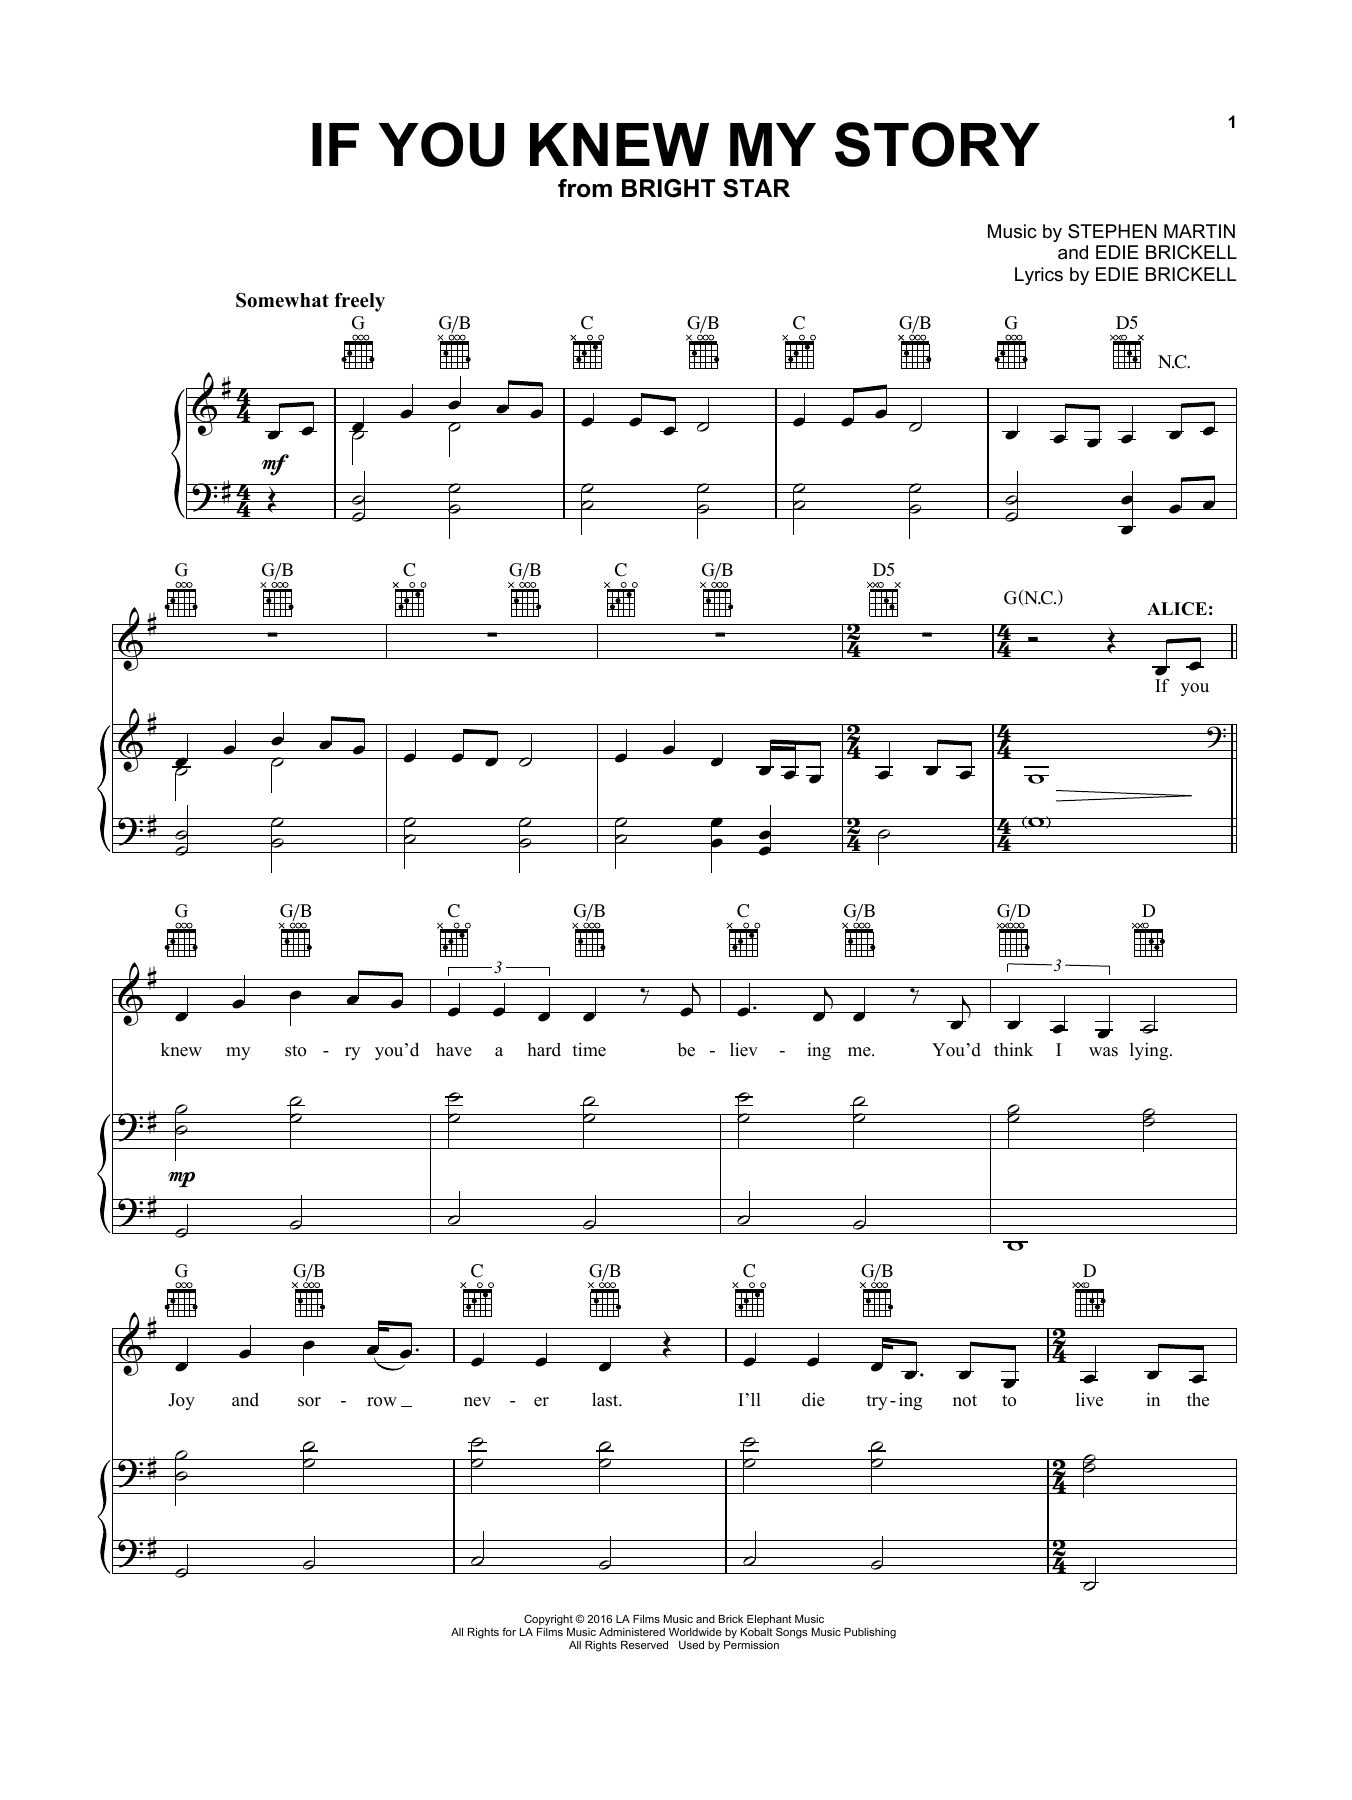 Download Carmen Cusack If You Knew My Story (from Bright Star Sheet Music